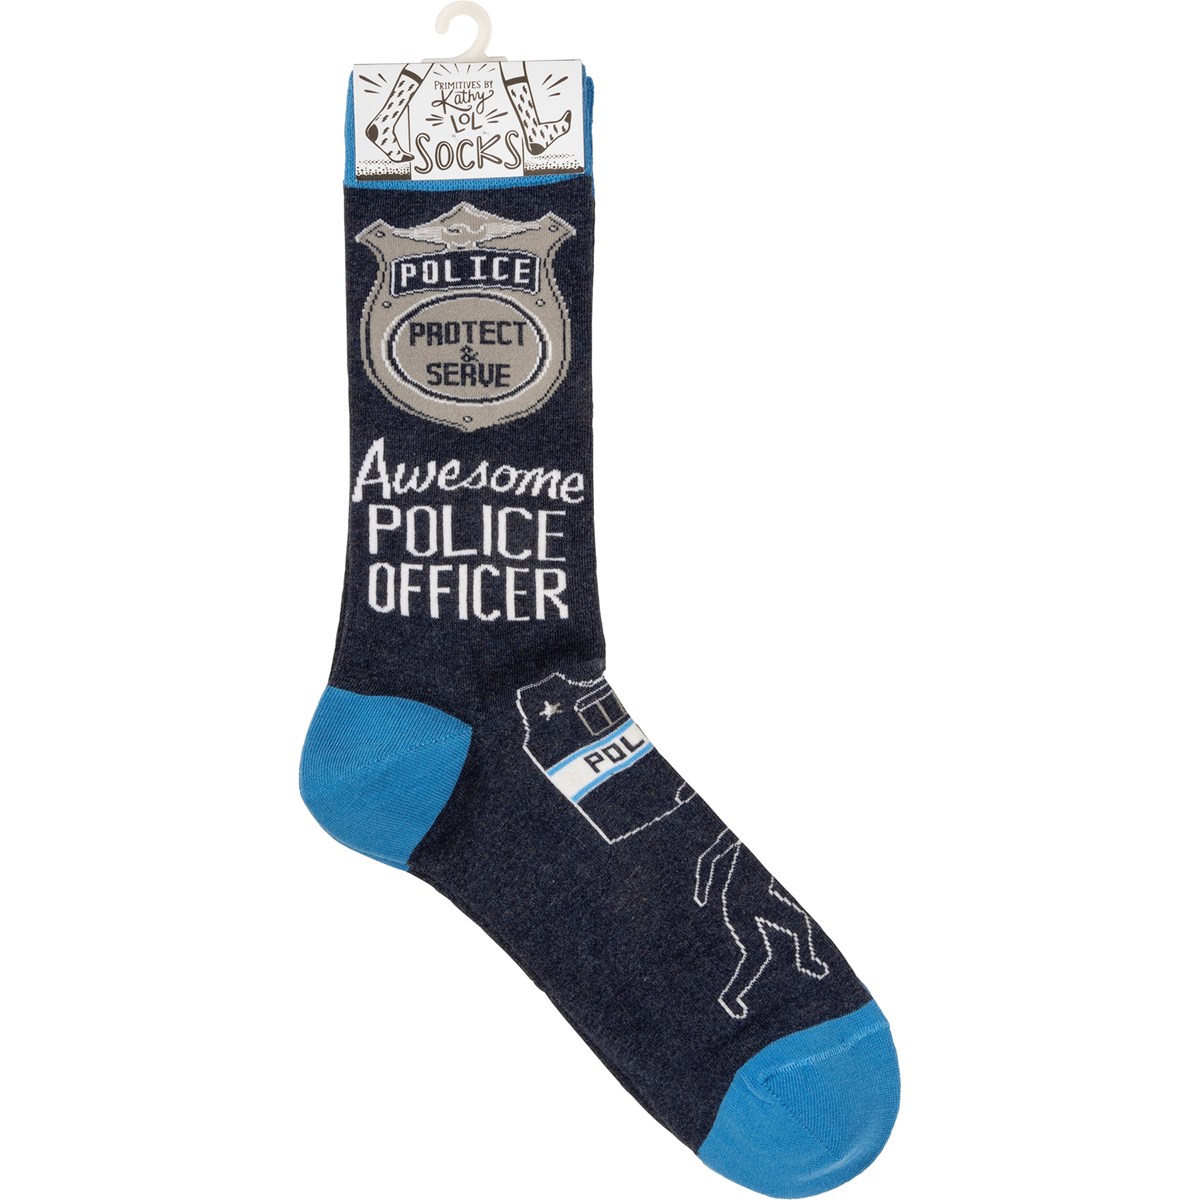 Socks - Awesome Police Officer - One Size Fits Most - Cotton, Nylon, Spandex